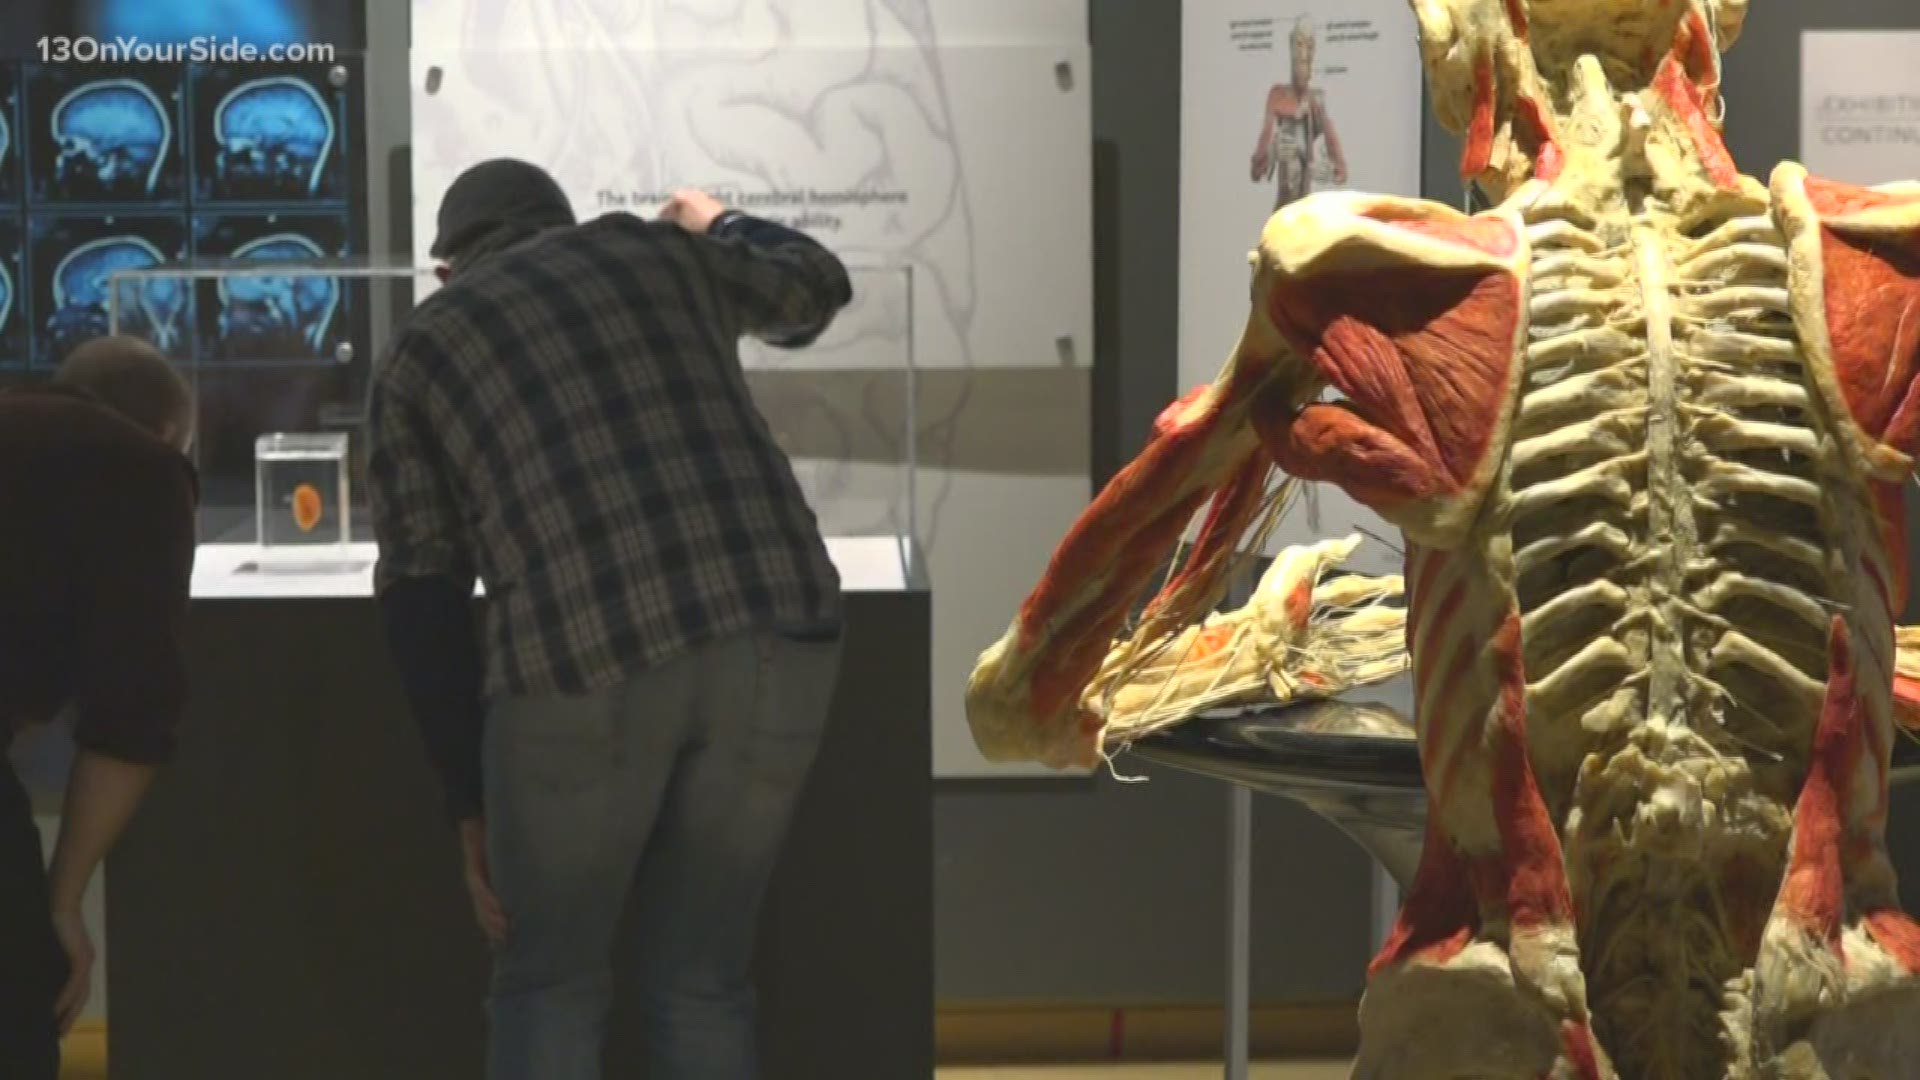 It's been nearly 10 years since Bodies Revealed came to Grand Rapids. On the exhibit's opening day Saturday, it was sold out.